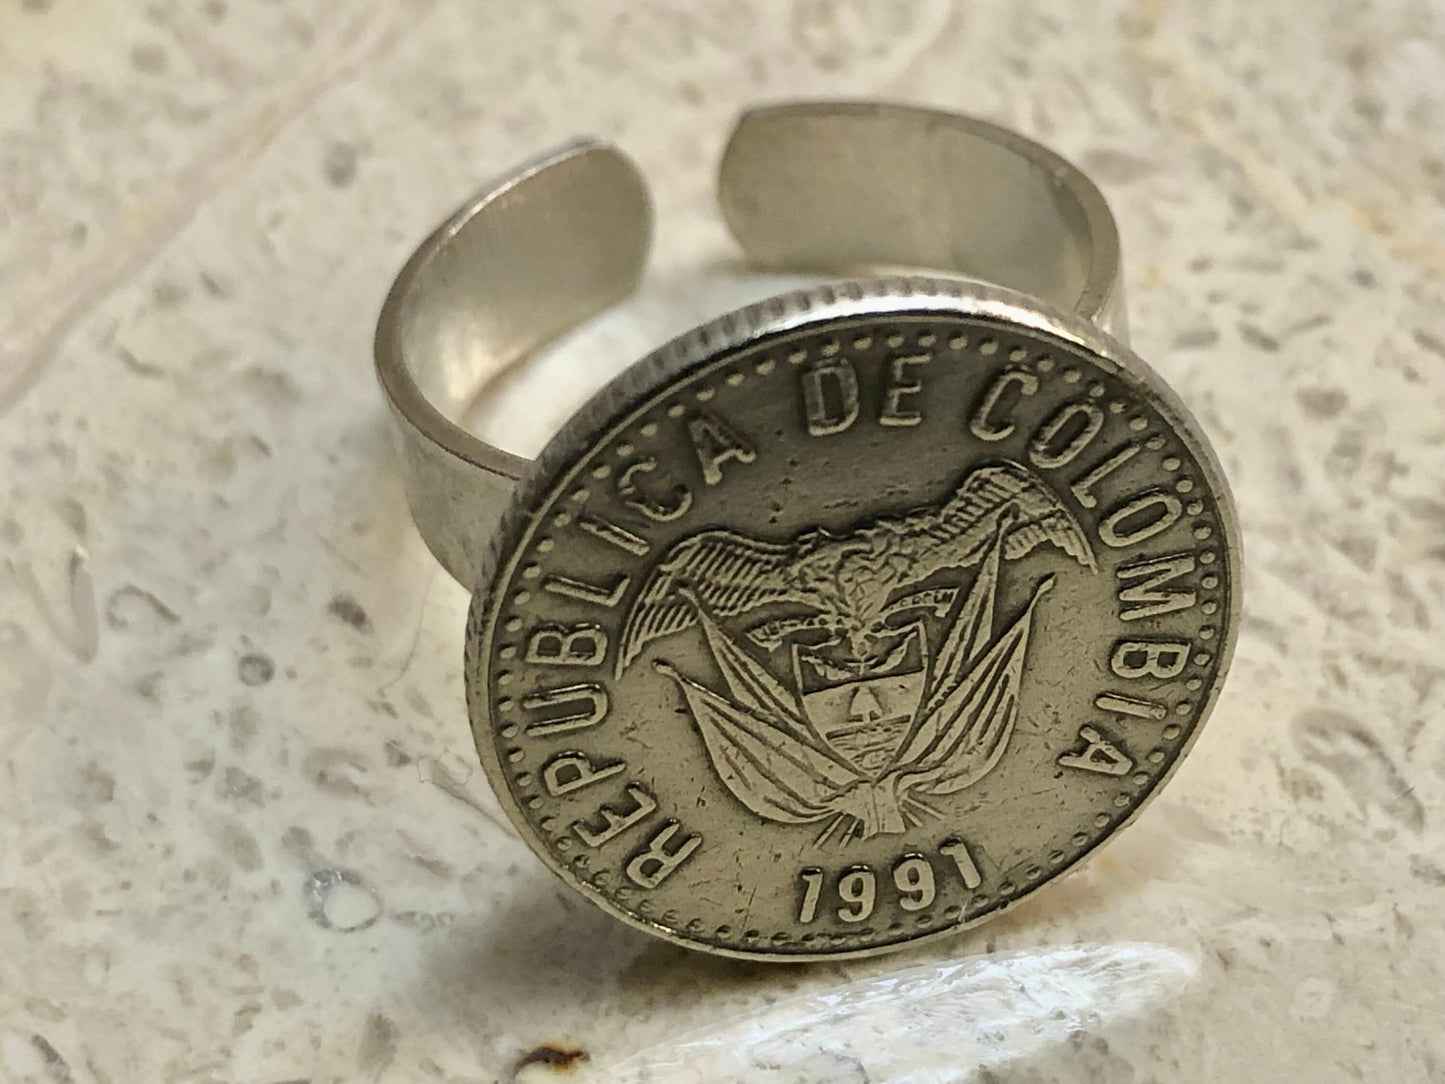 Colombia Coin Ring Columbian 10 Peso Vintage Adjustable Custom Made Rare Coins Coin Enthusiast Fashion Accessory Handmade